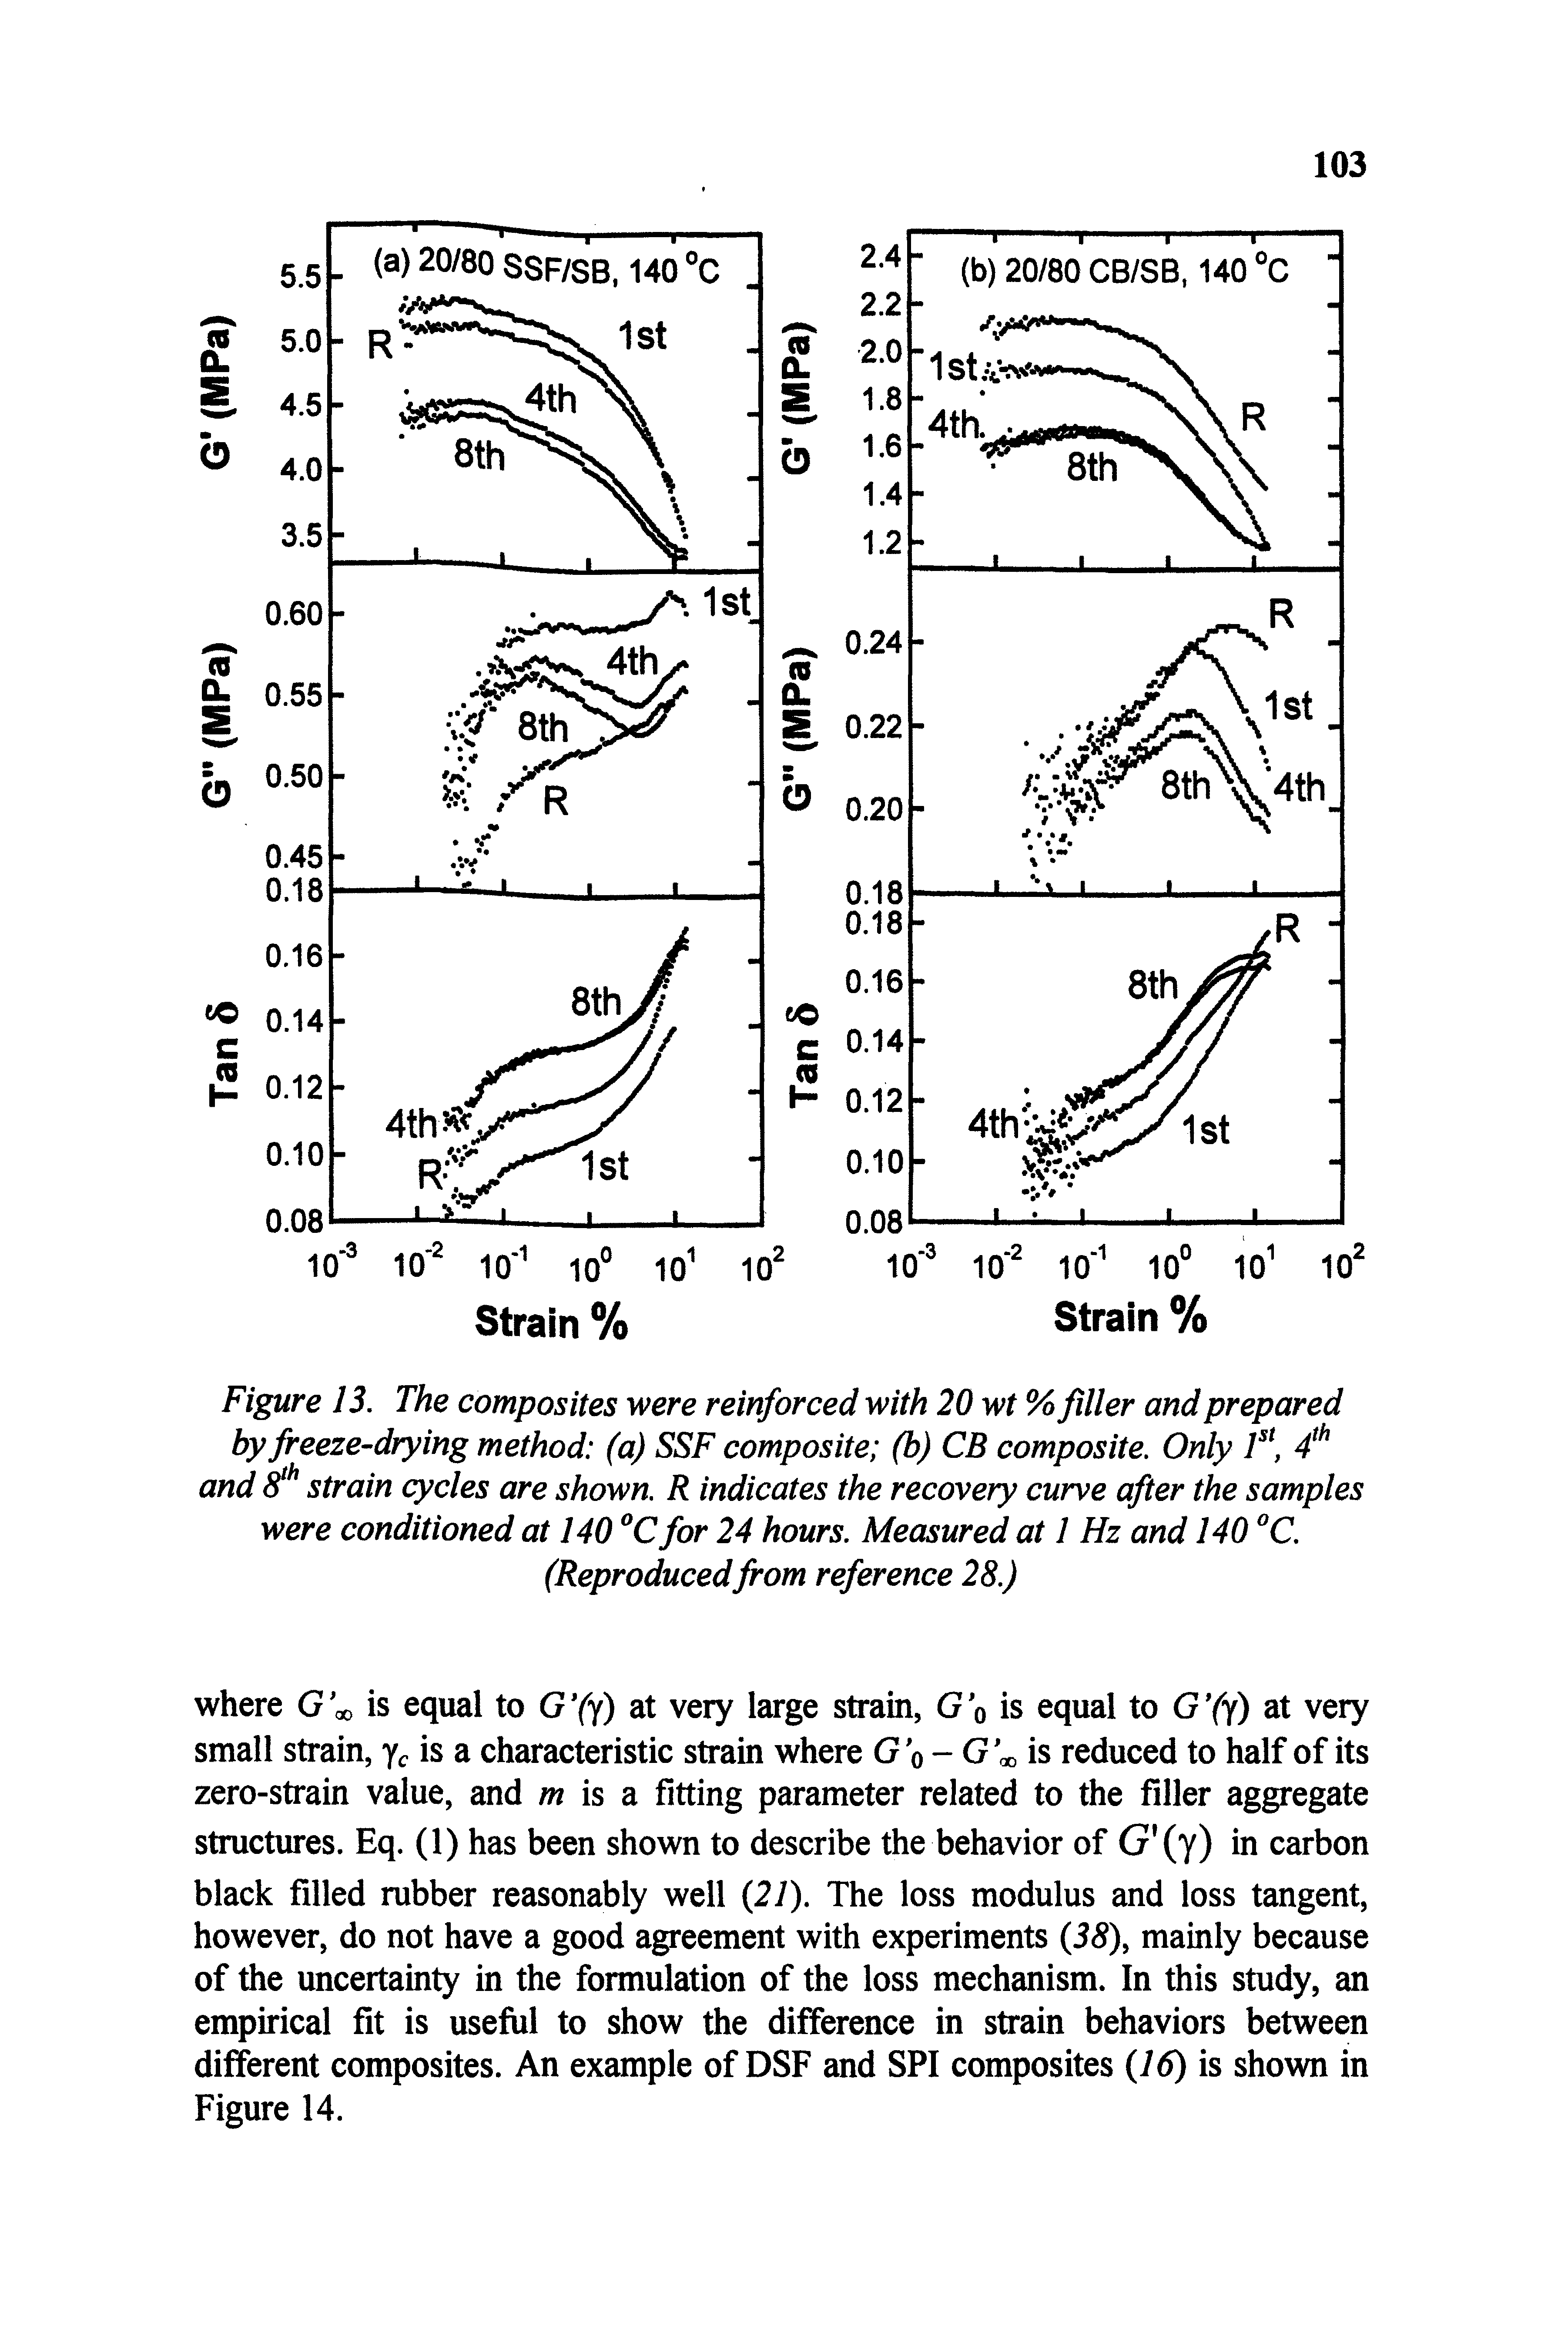 Figure 13. The composites were reinforced with 20 wt % filler and prepared by freeze-drying method (a) SSF composite (b) CB composite. Only T and o strain cycles are shown. R indicates the recovery curve after the samples were conditioned at 140 for 24 hours. Measured at 1 Hz and 140 C. (Reproducedfrom reference 28.)...